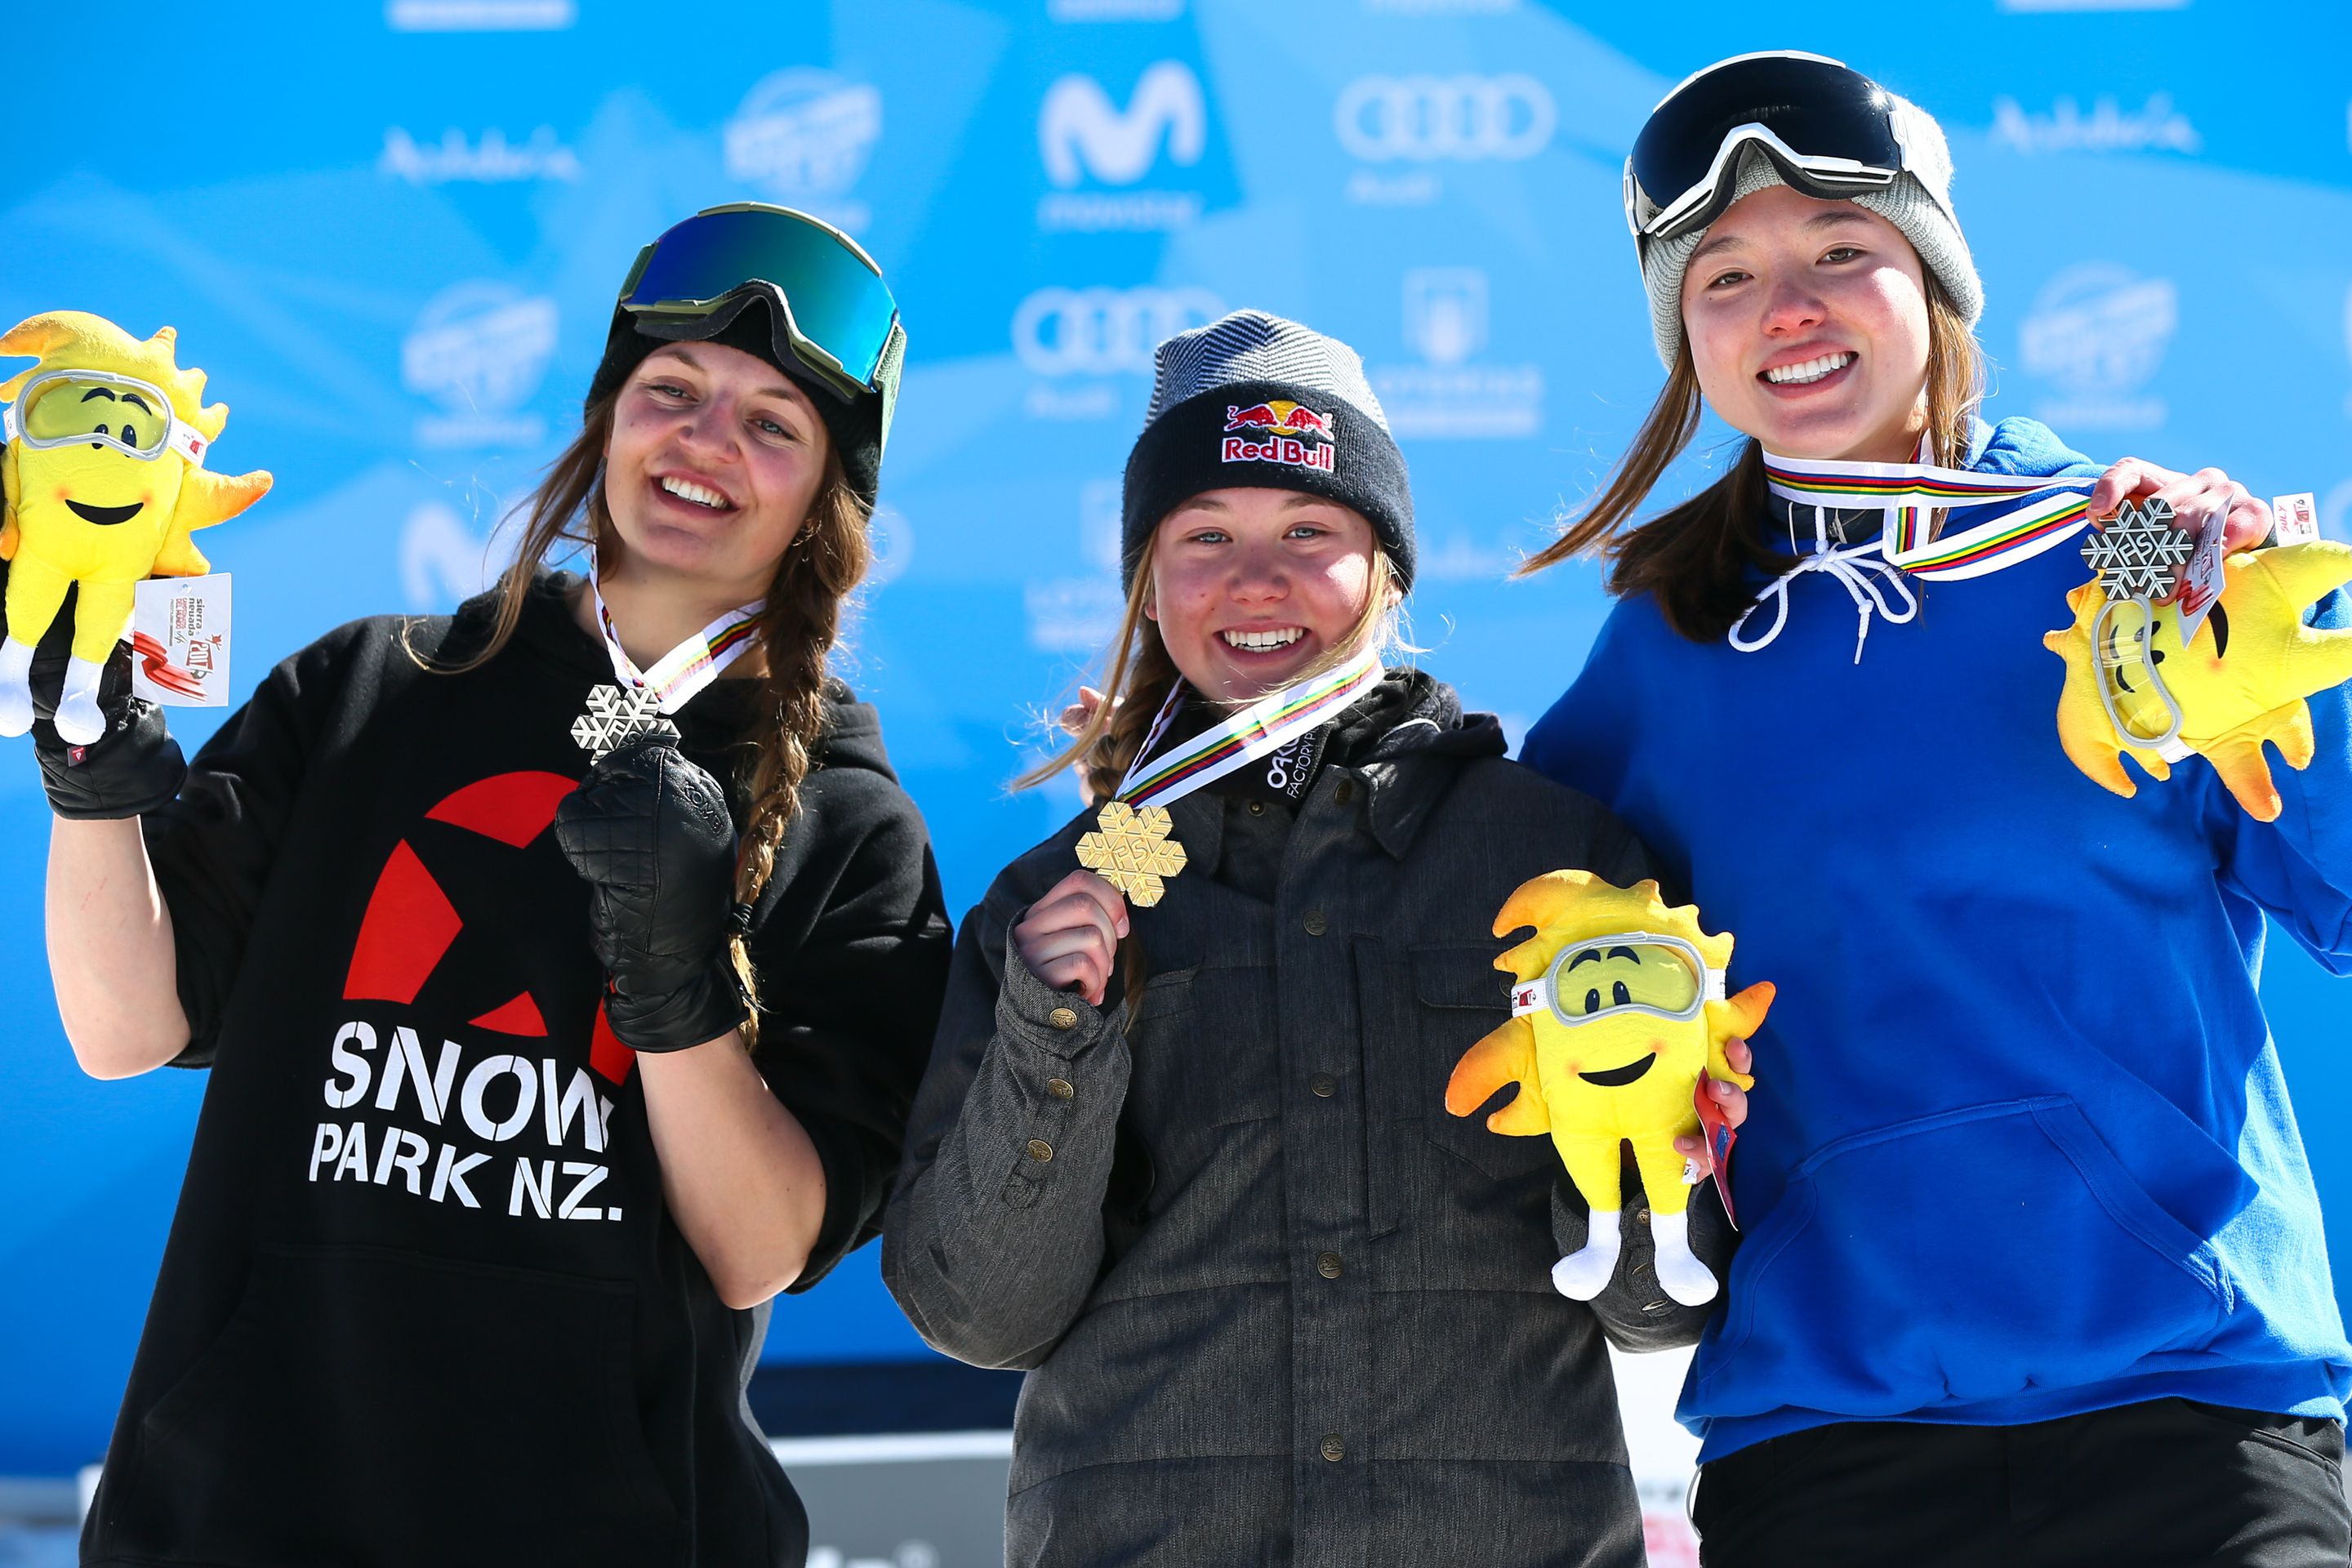 SIERRA NEVADA, SPAIN Ð MARCH 19: Tess Ledeux of France wins the gold medal, Emma Dahlstrom of Sweden wins the silver medal, Isabel Atkin of Great Britain wins the bronze medal during the FIS Freestyle Ski & Snowboard World Championships Slopestyle (FS) on March 19, 2017 in Sierra Nevada, Spain (Photo by Laurent Salino/Agence Zoom)